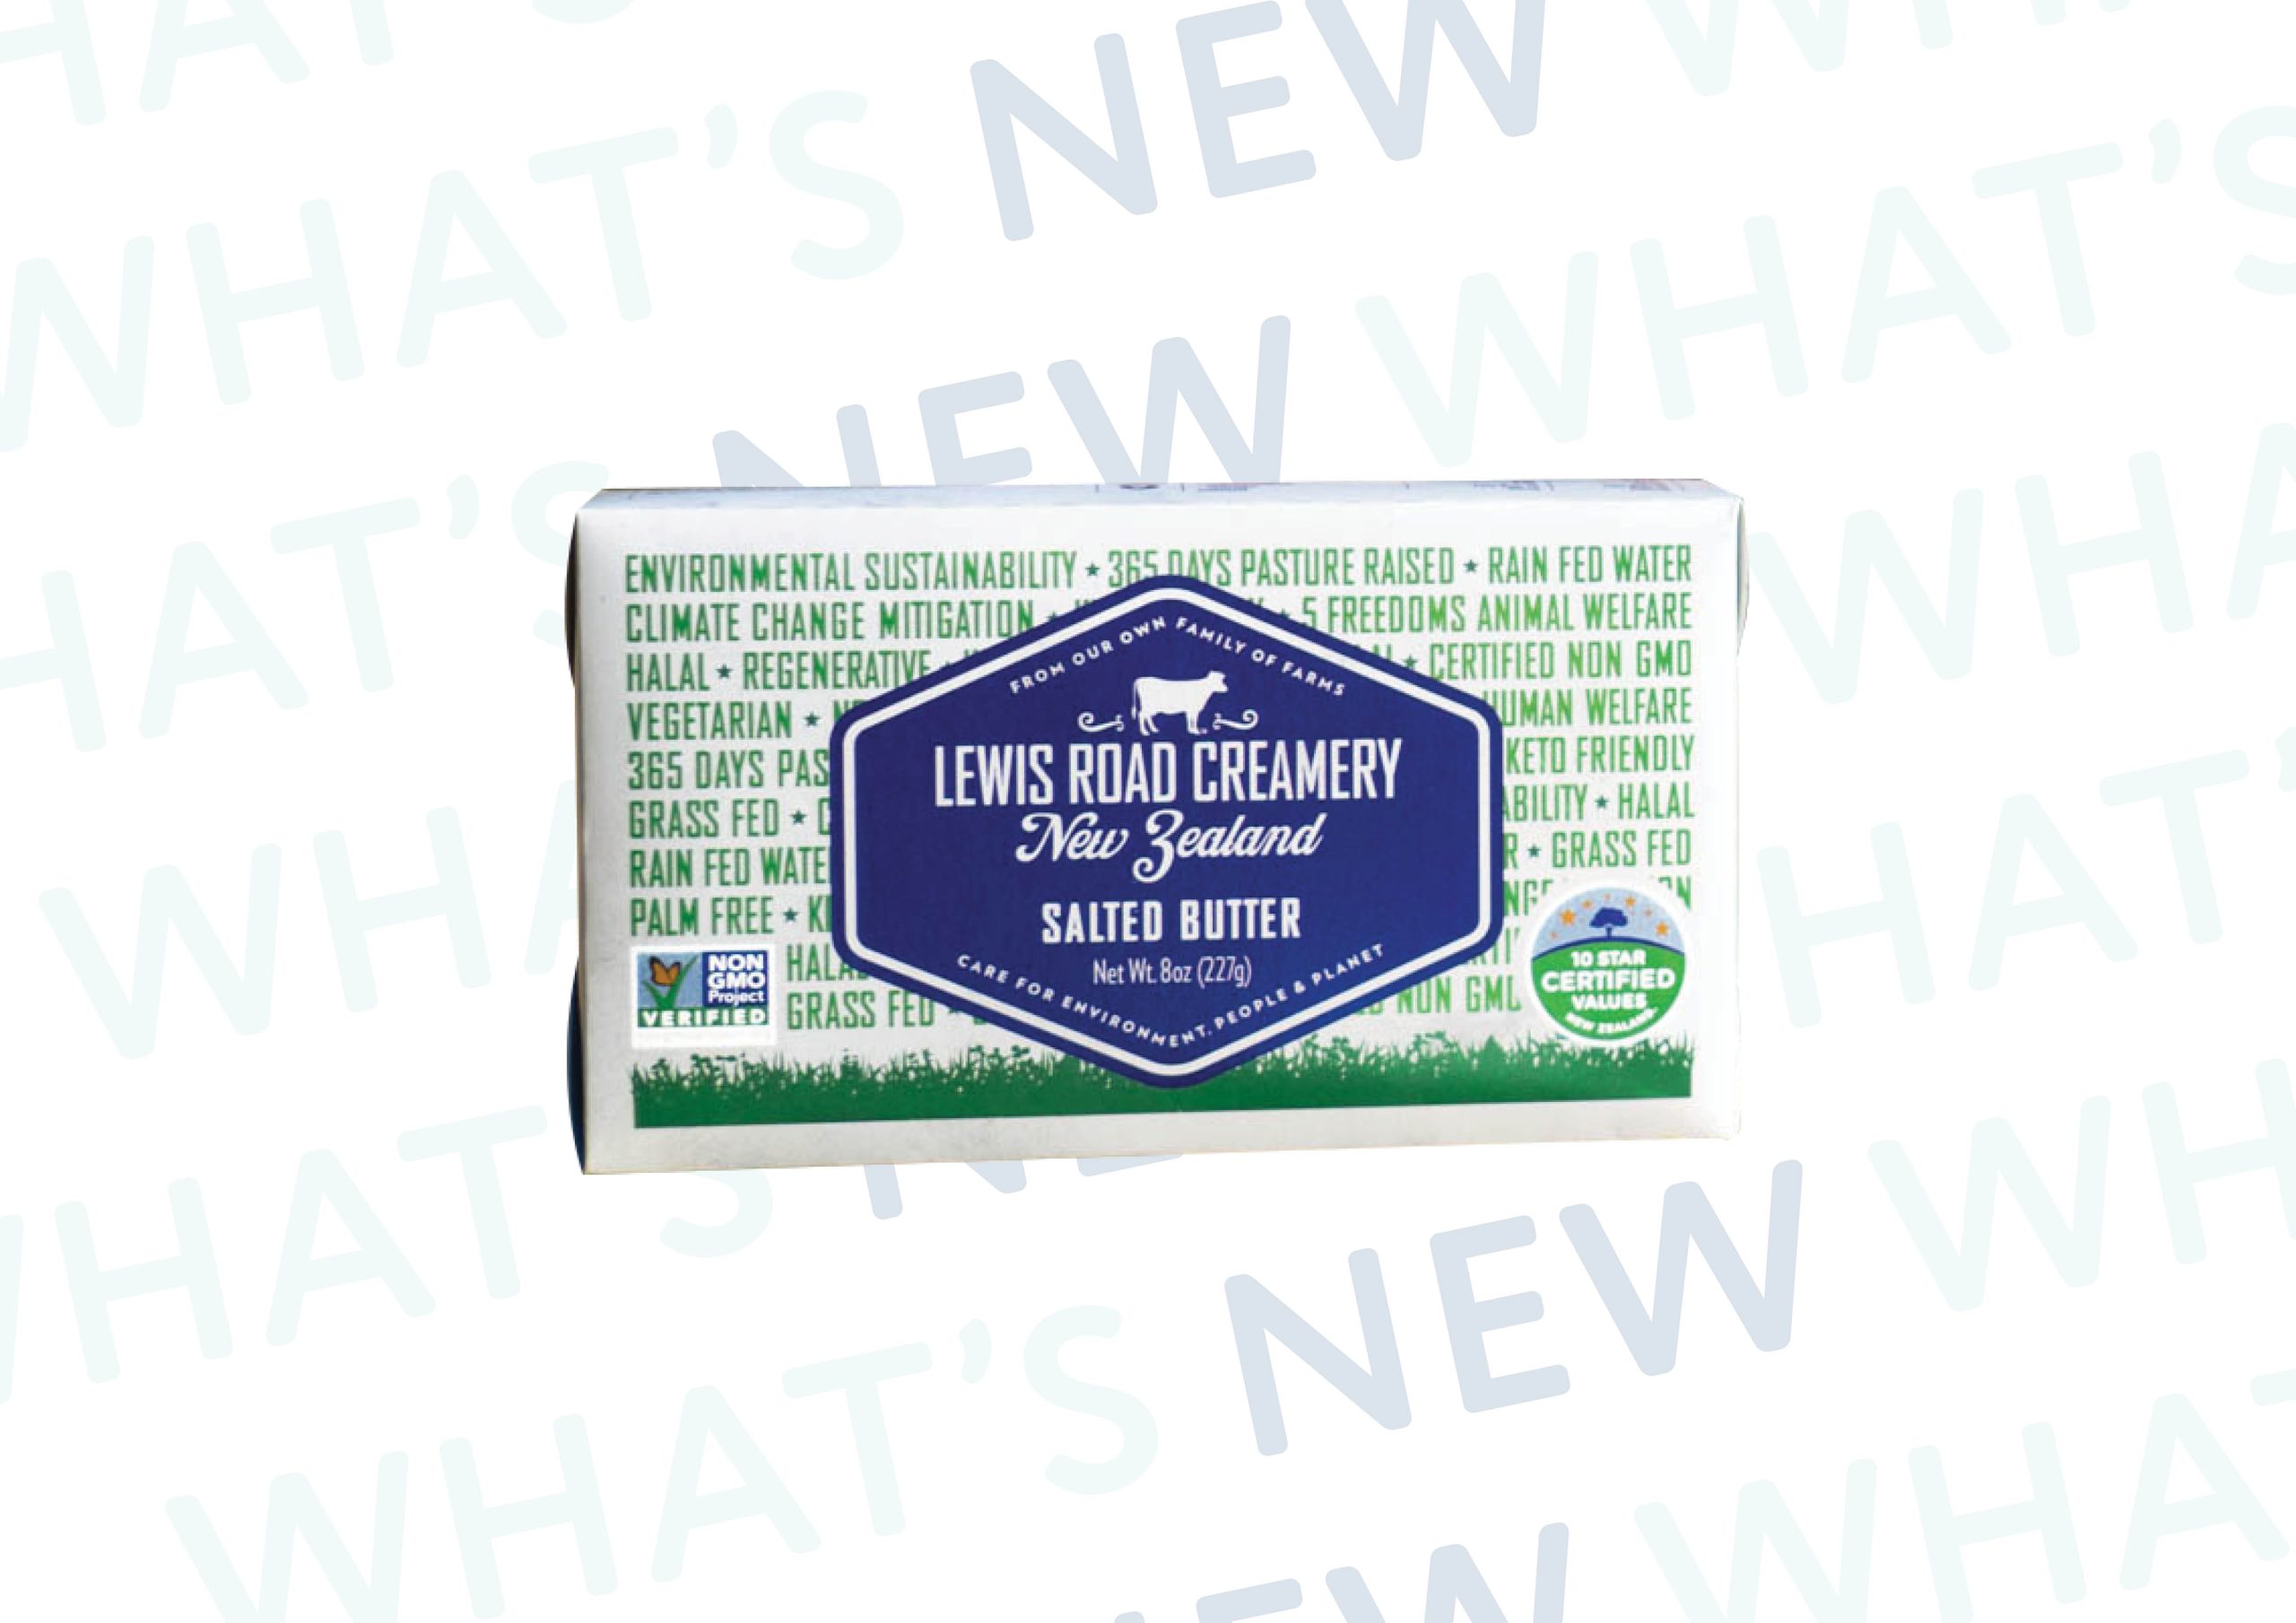 Lewis Road Creamery 10 Star Export Butter